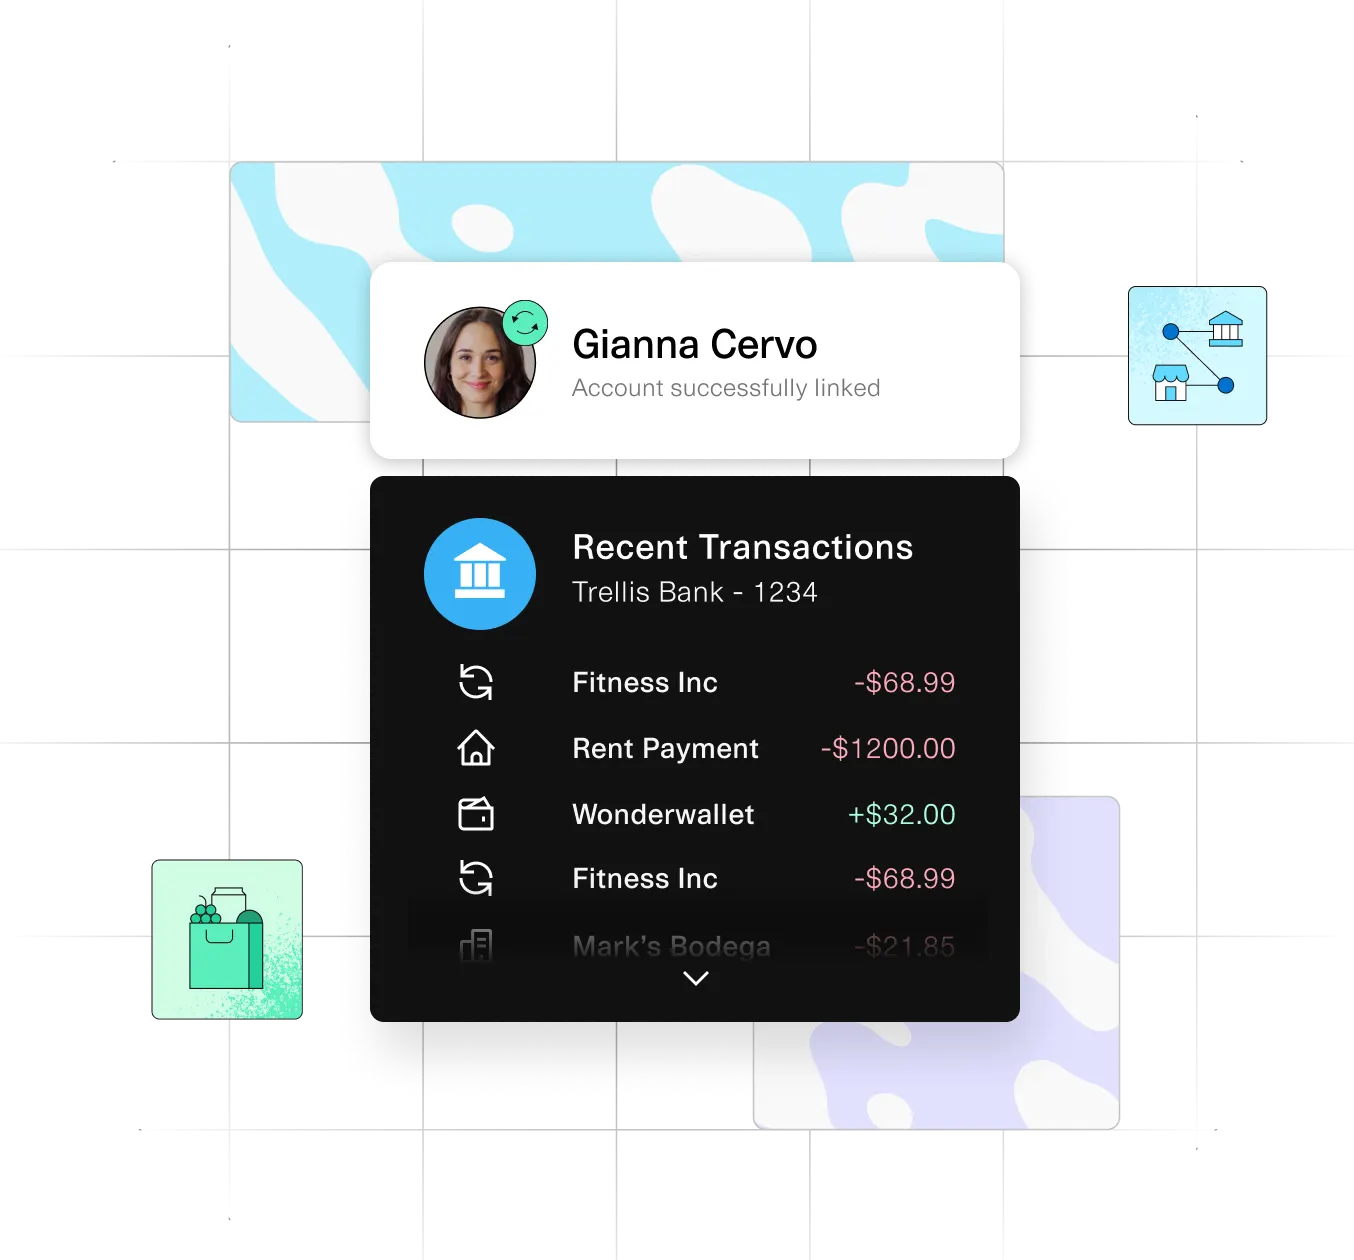 A banking app interface displaying a user's profile and transaction history. The profile for 'Gianna Cervo' indicates the account is linked successfully. Below are recent transactions listing debits for fitness services and rent, along with a credit from a service called Wonderwallet. Icons accompany the transactions, suggesting the nature of each expense.